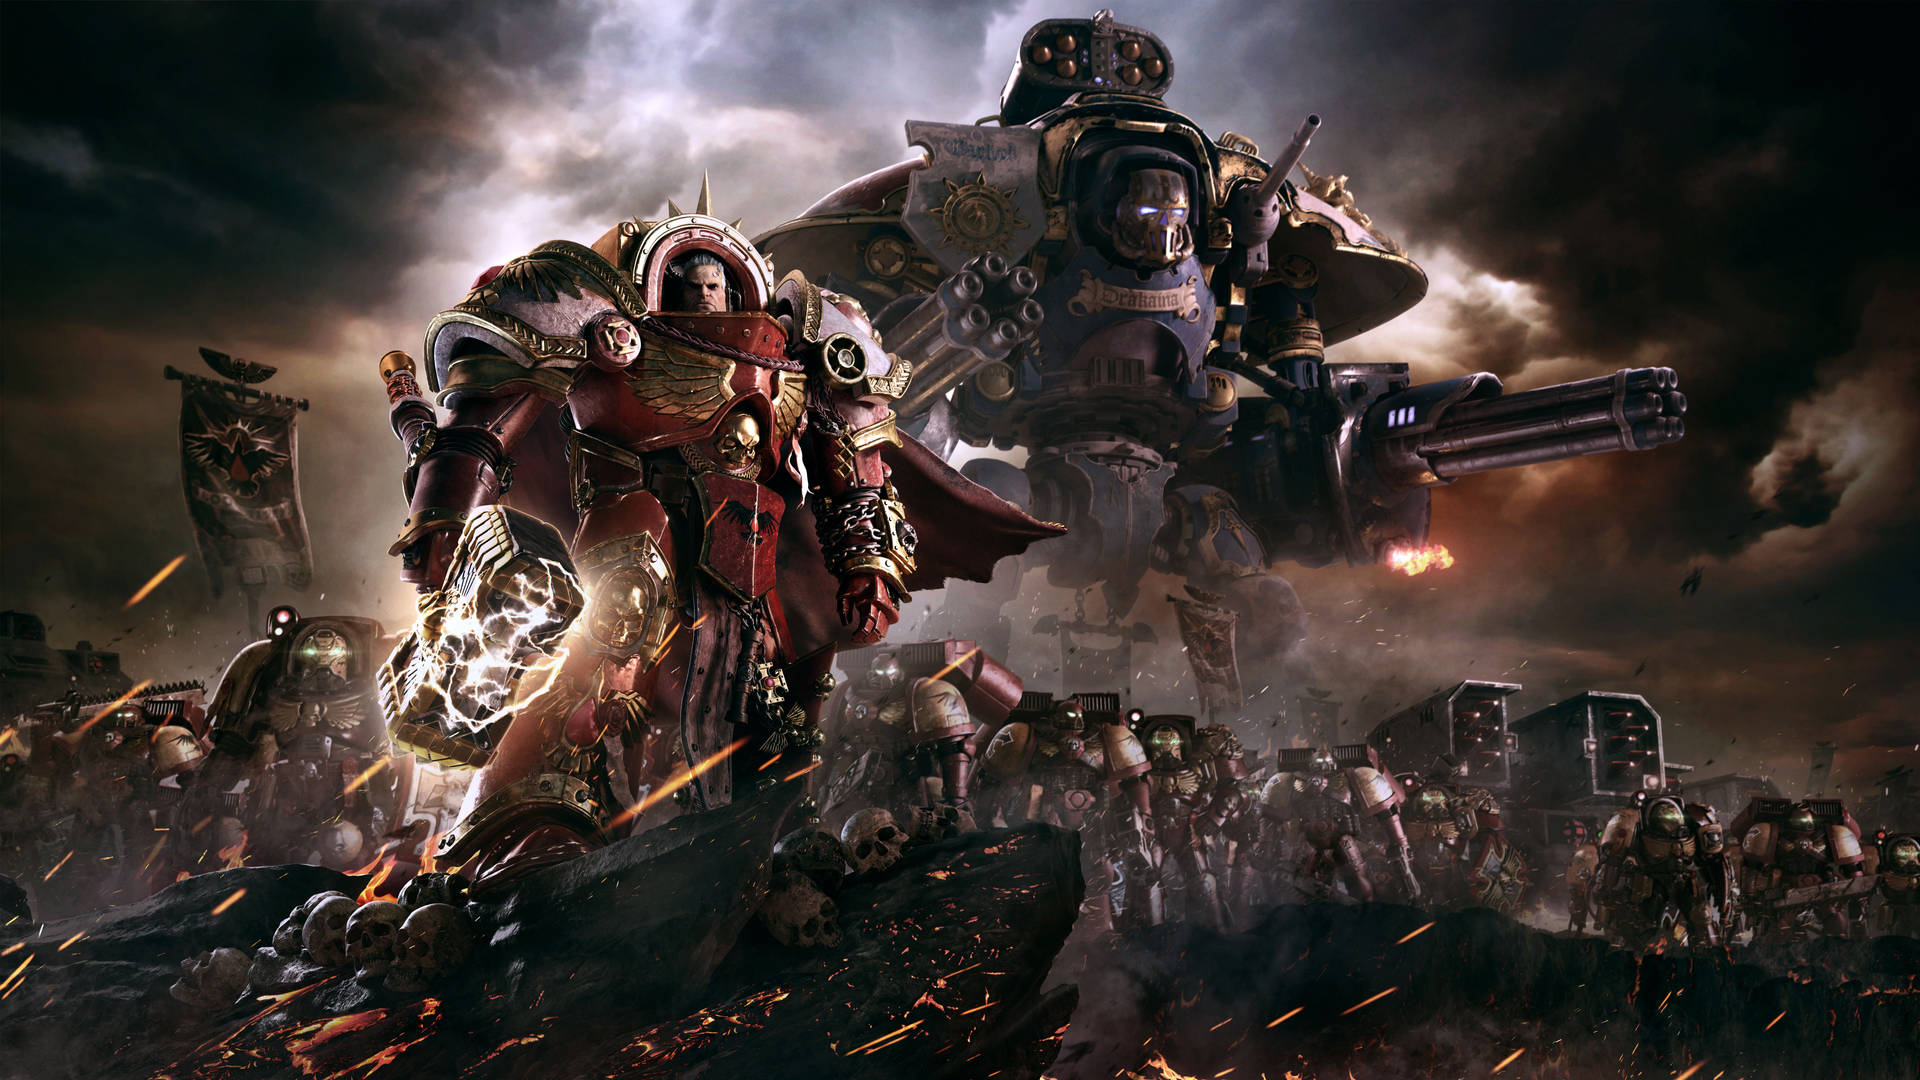 Warhammer 7680X4320 Wallpaper and Background Image